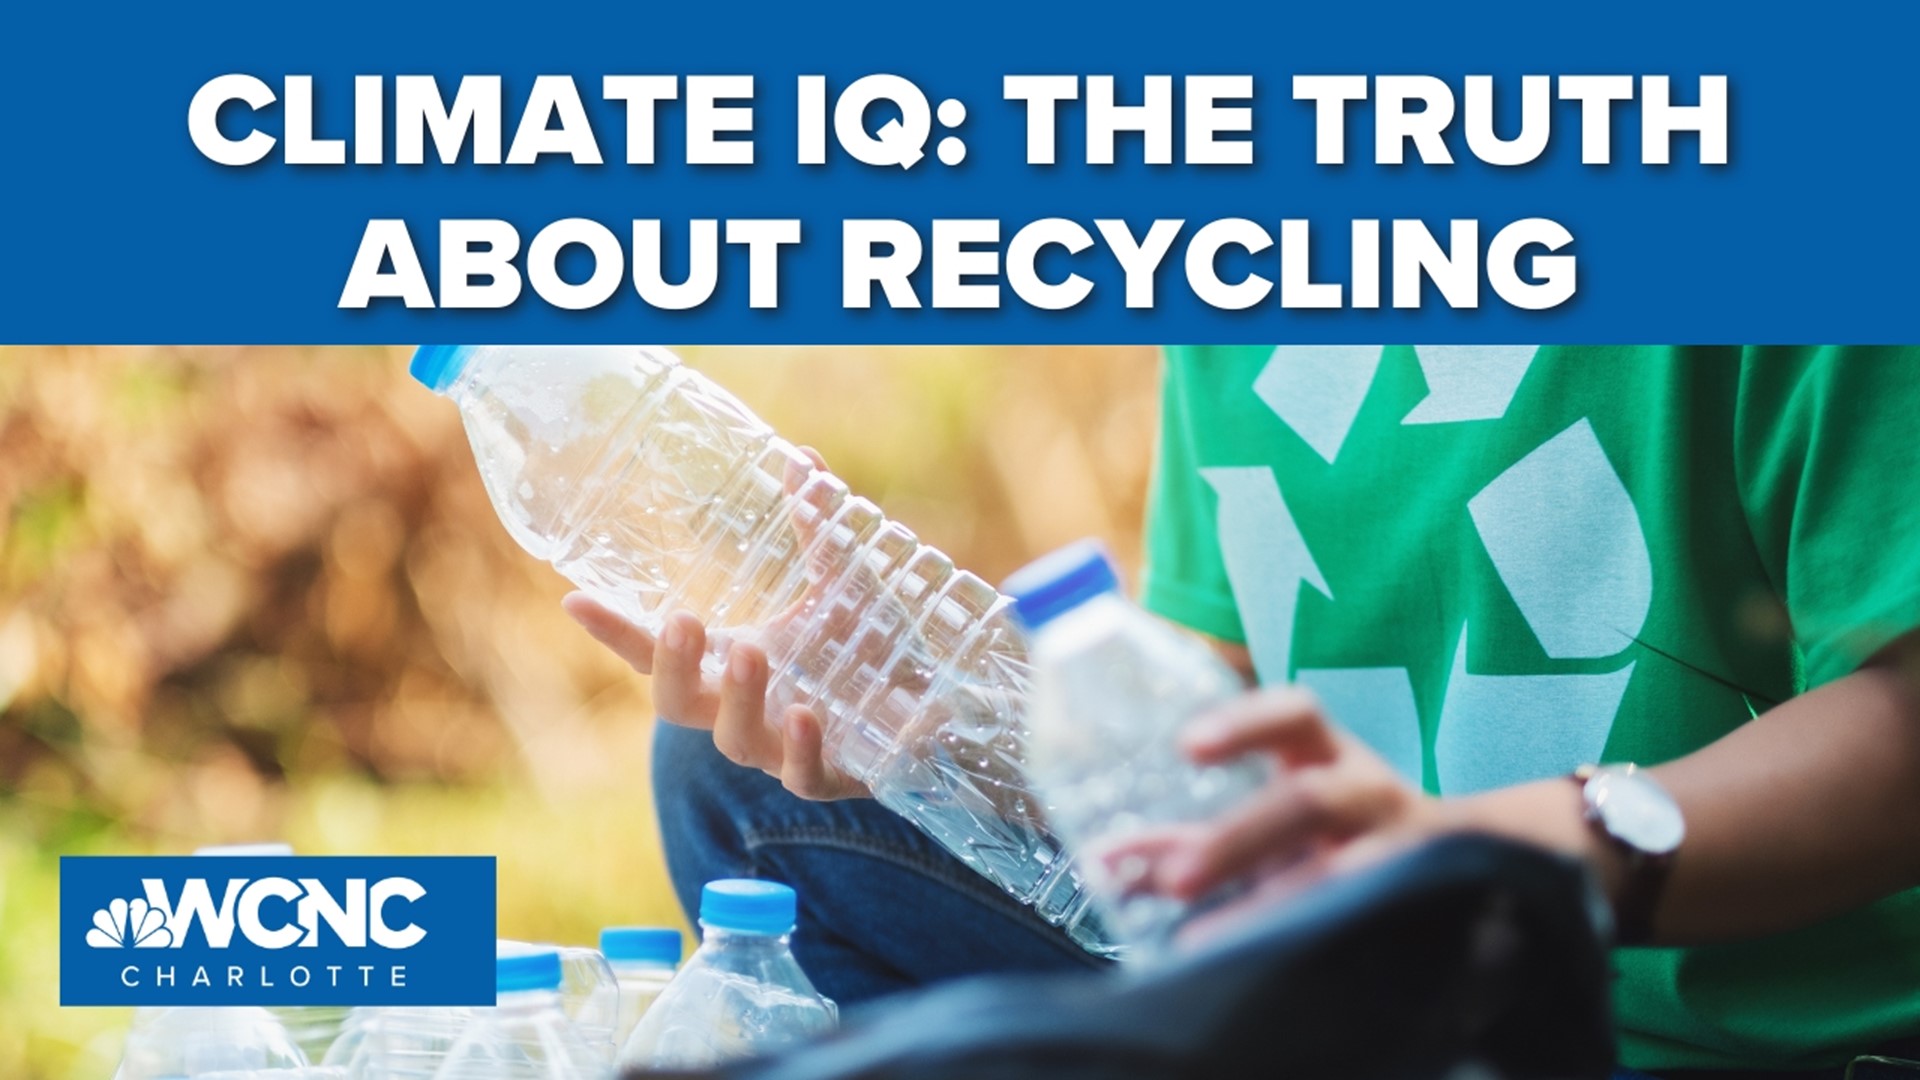 Many labels display “100% recyclable.” Is this phase a climate game-changer or is it just another catchy marketing ploy?